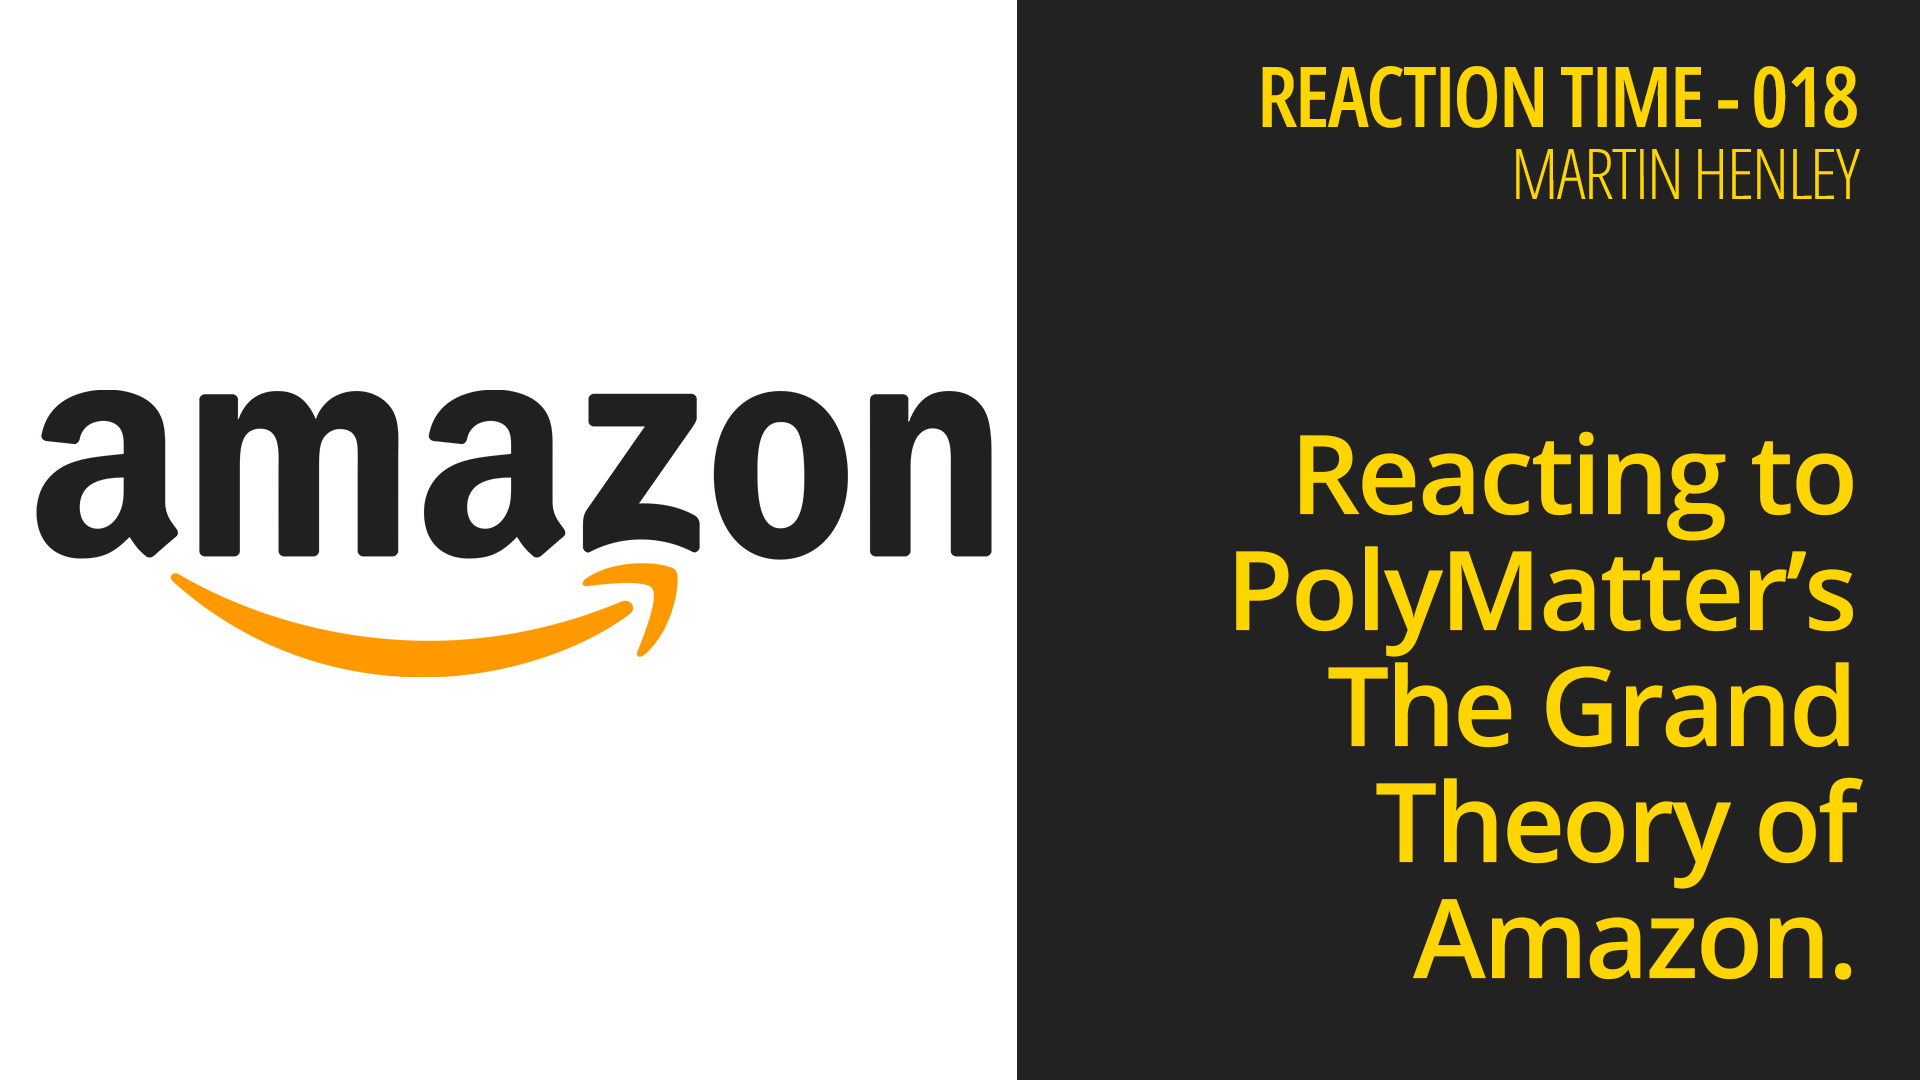 Reacting to PolyMatter’s The Grand Theory of Amazon – Reaction Time 018